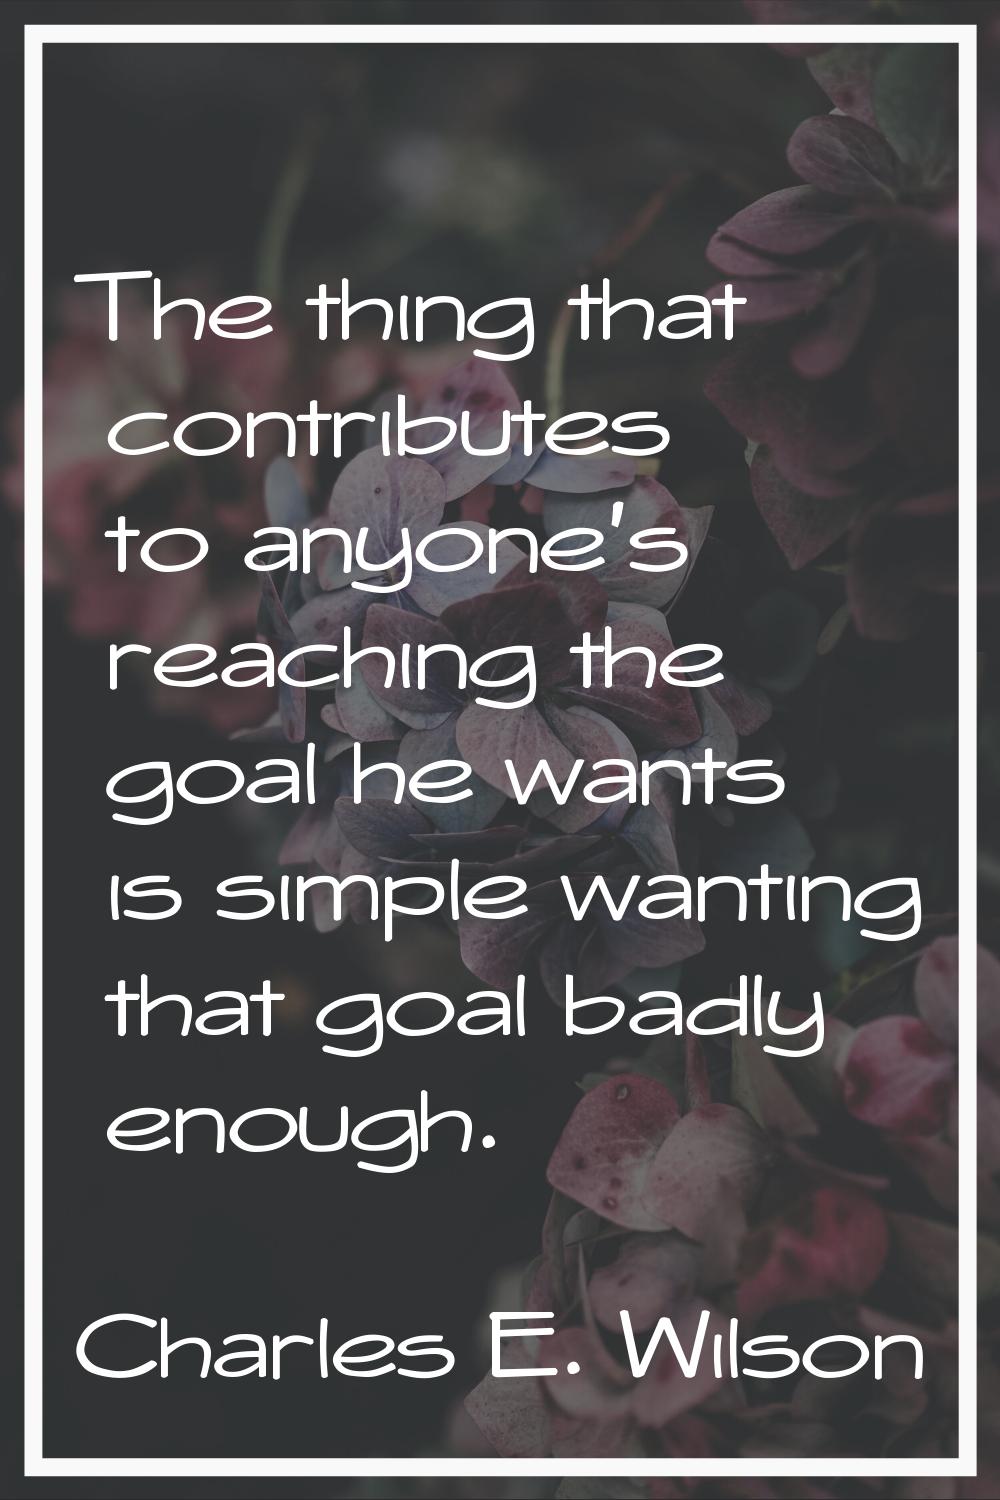 The thing that contributes to anyone's reaching the goal he wants is simple wanting that goal badly